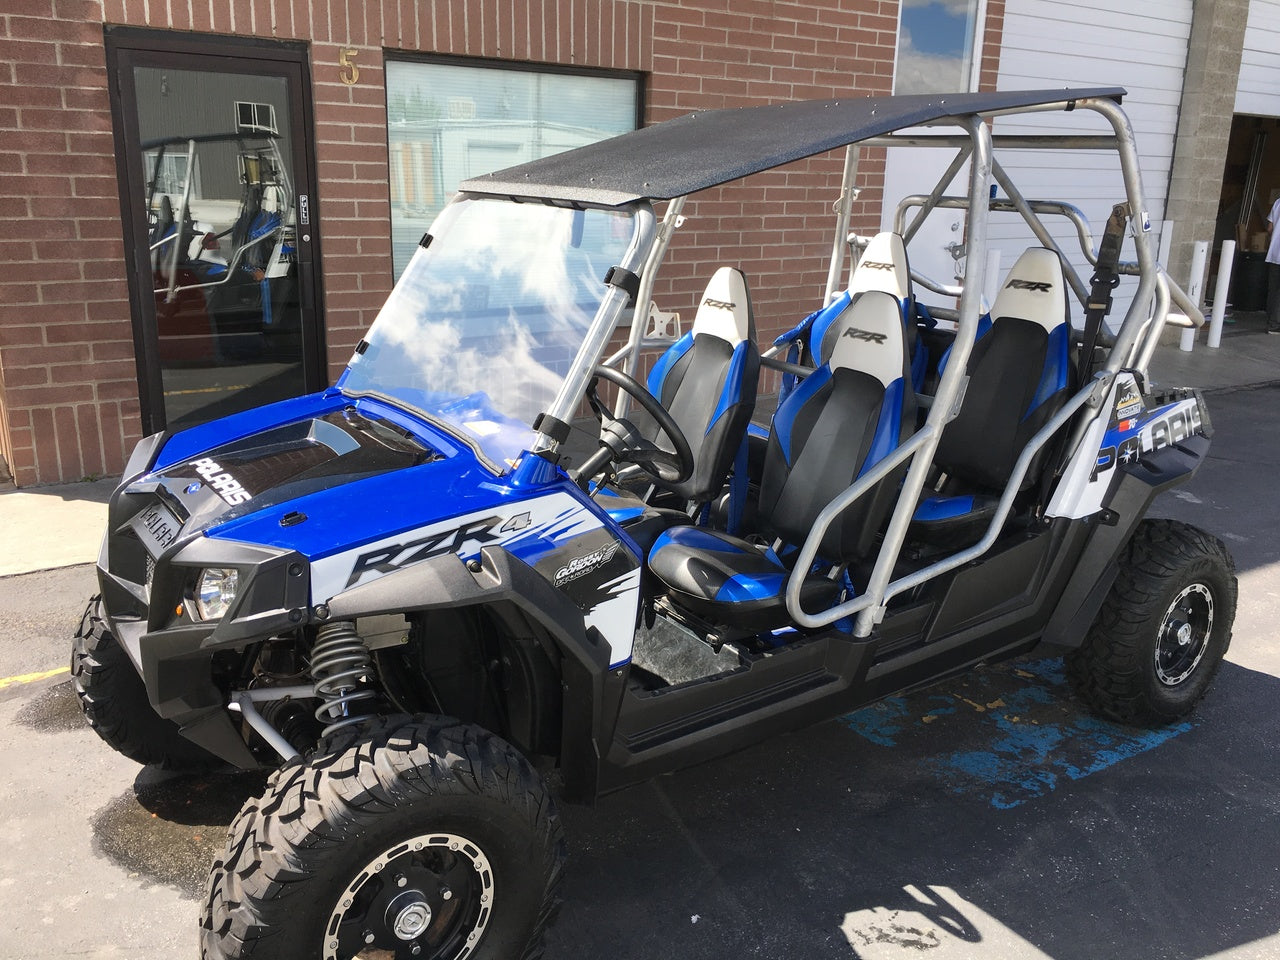 Full Polycarbonate Windshield with Quick Straps for RZR 570, 800, XP900 (upgrade options)